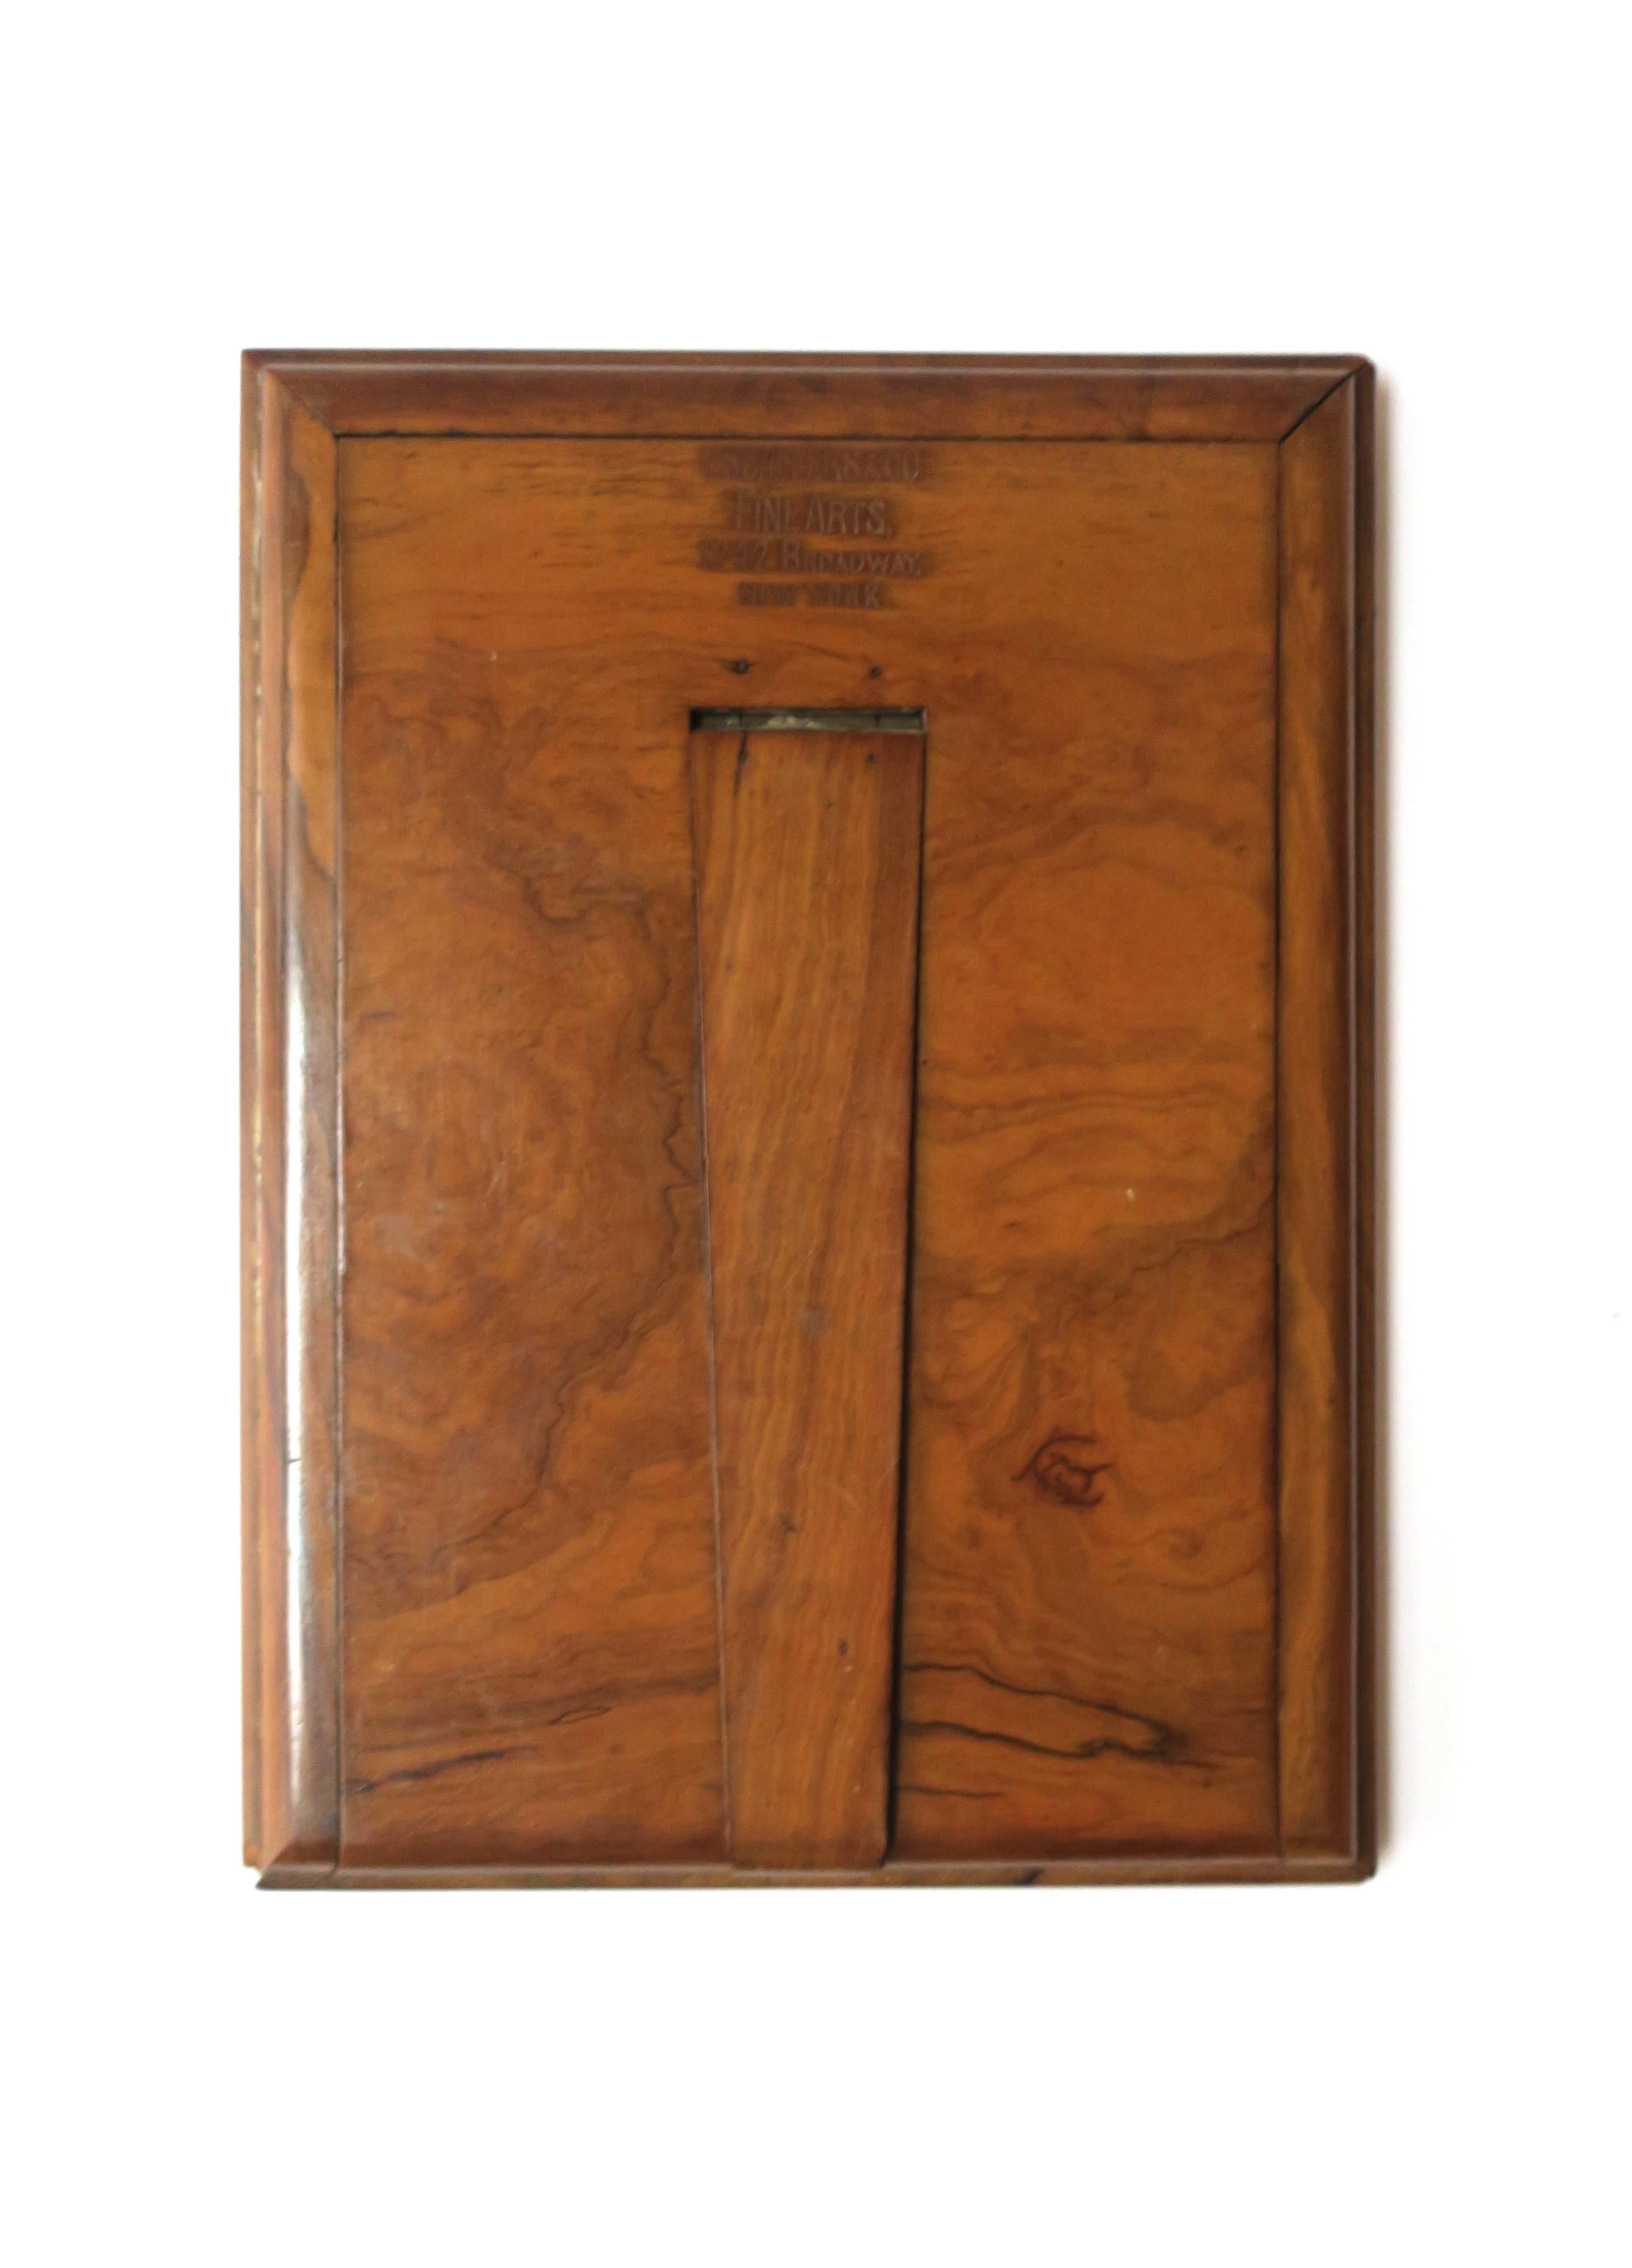 Olive or Fruitwood Picture Frame, circa Late-19th century  For Sale 3